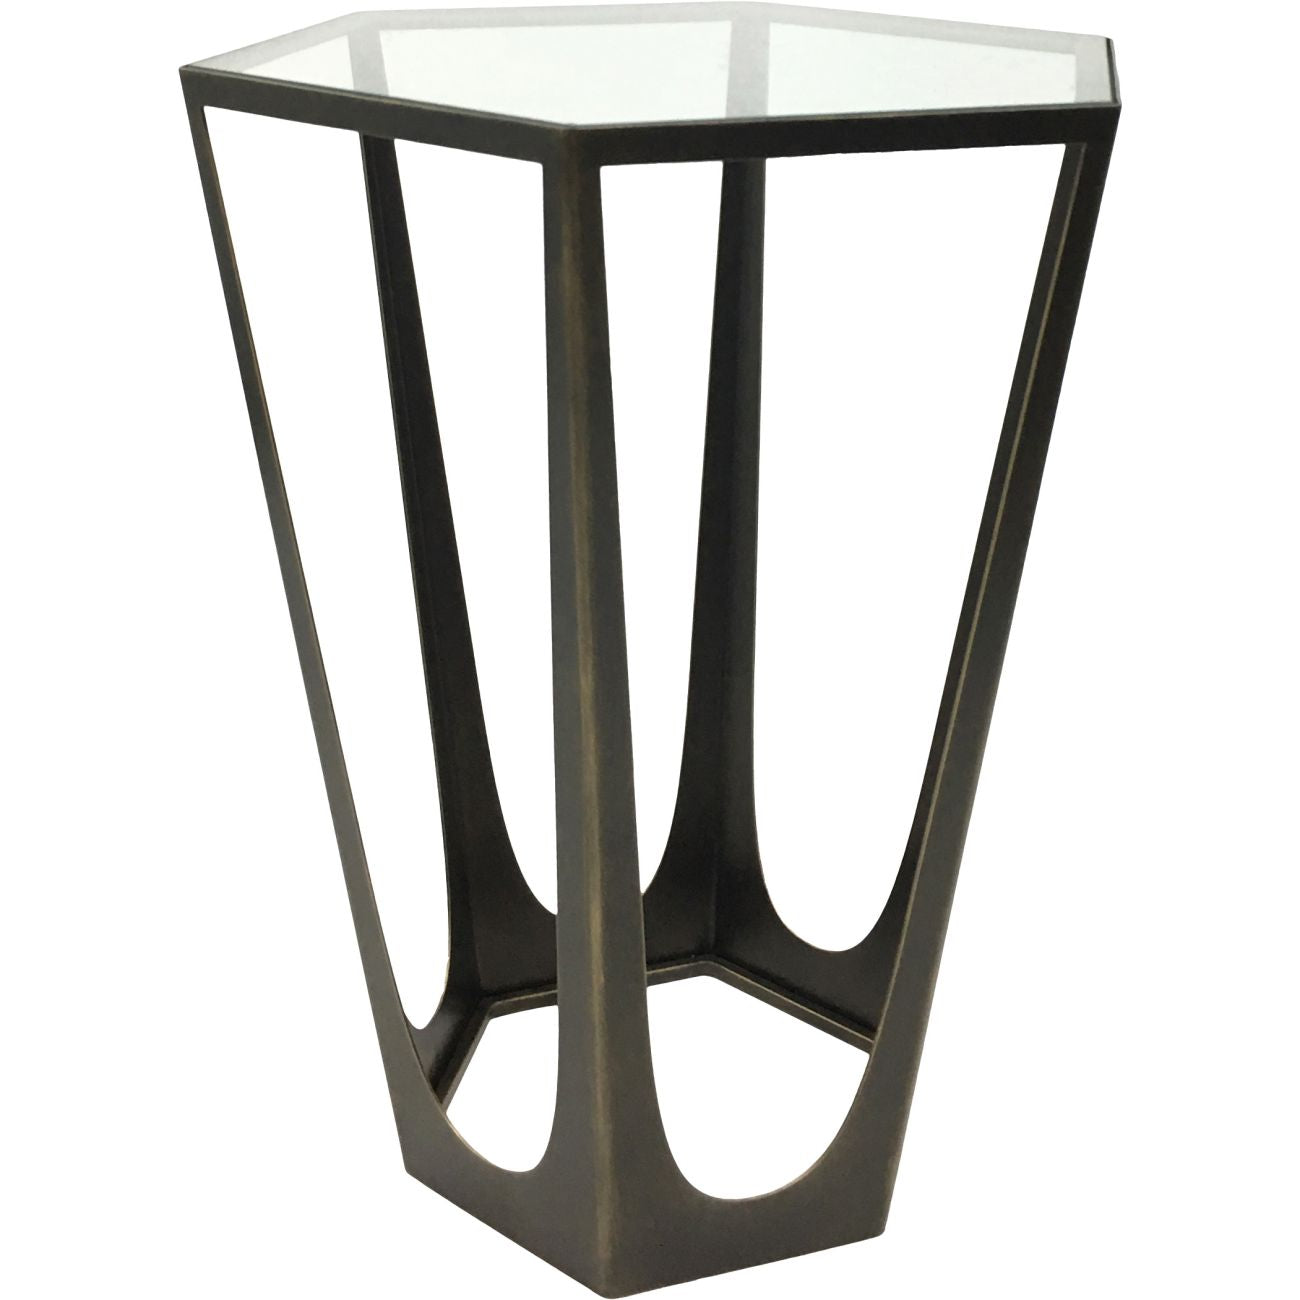 Urban Botanic Catalan Bronze Gilded Side Table with Glass Top